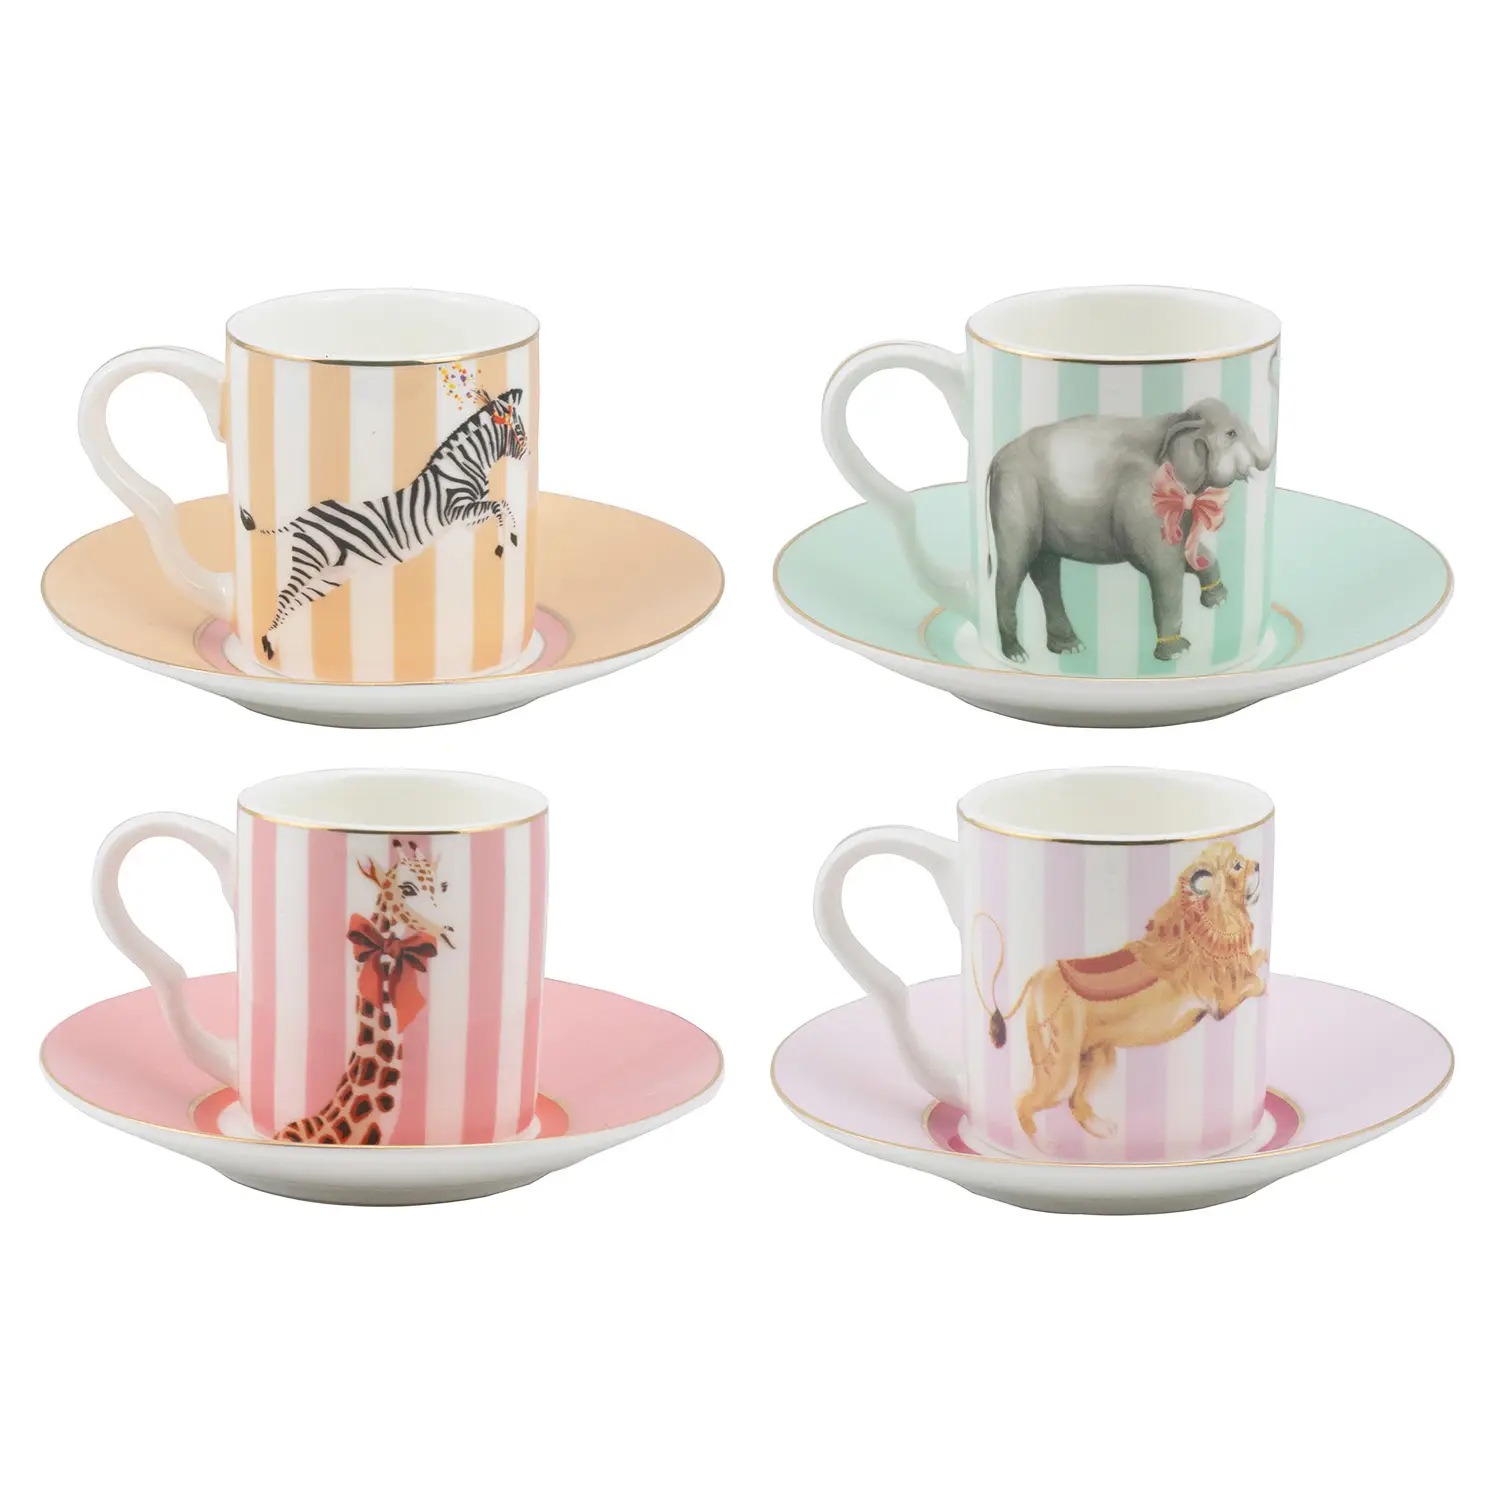 Yvonne Ellen Set of 4 Animal Espresso Cup and Saucers